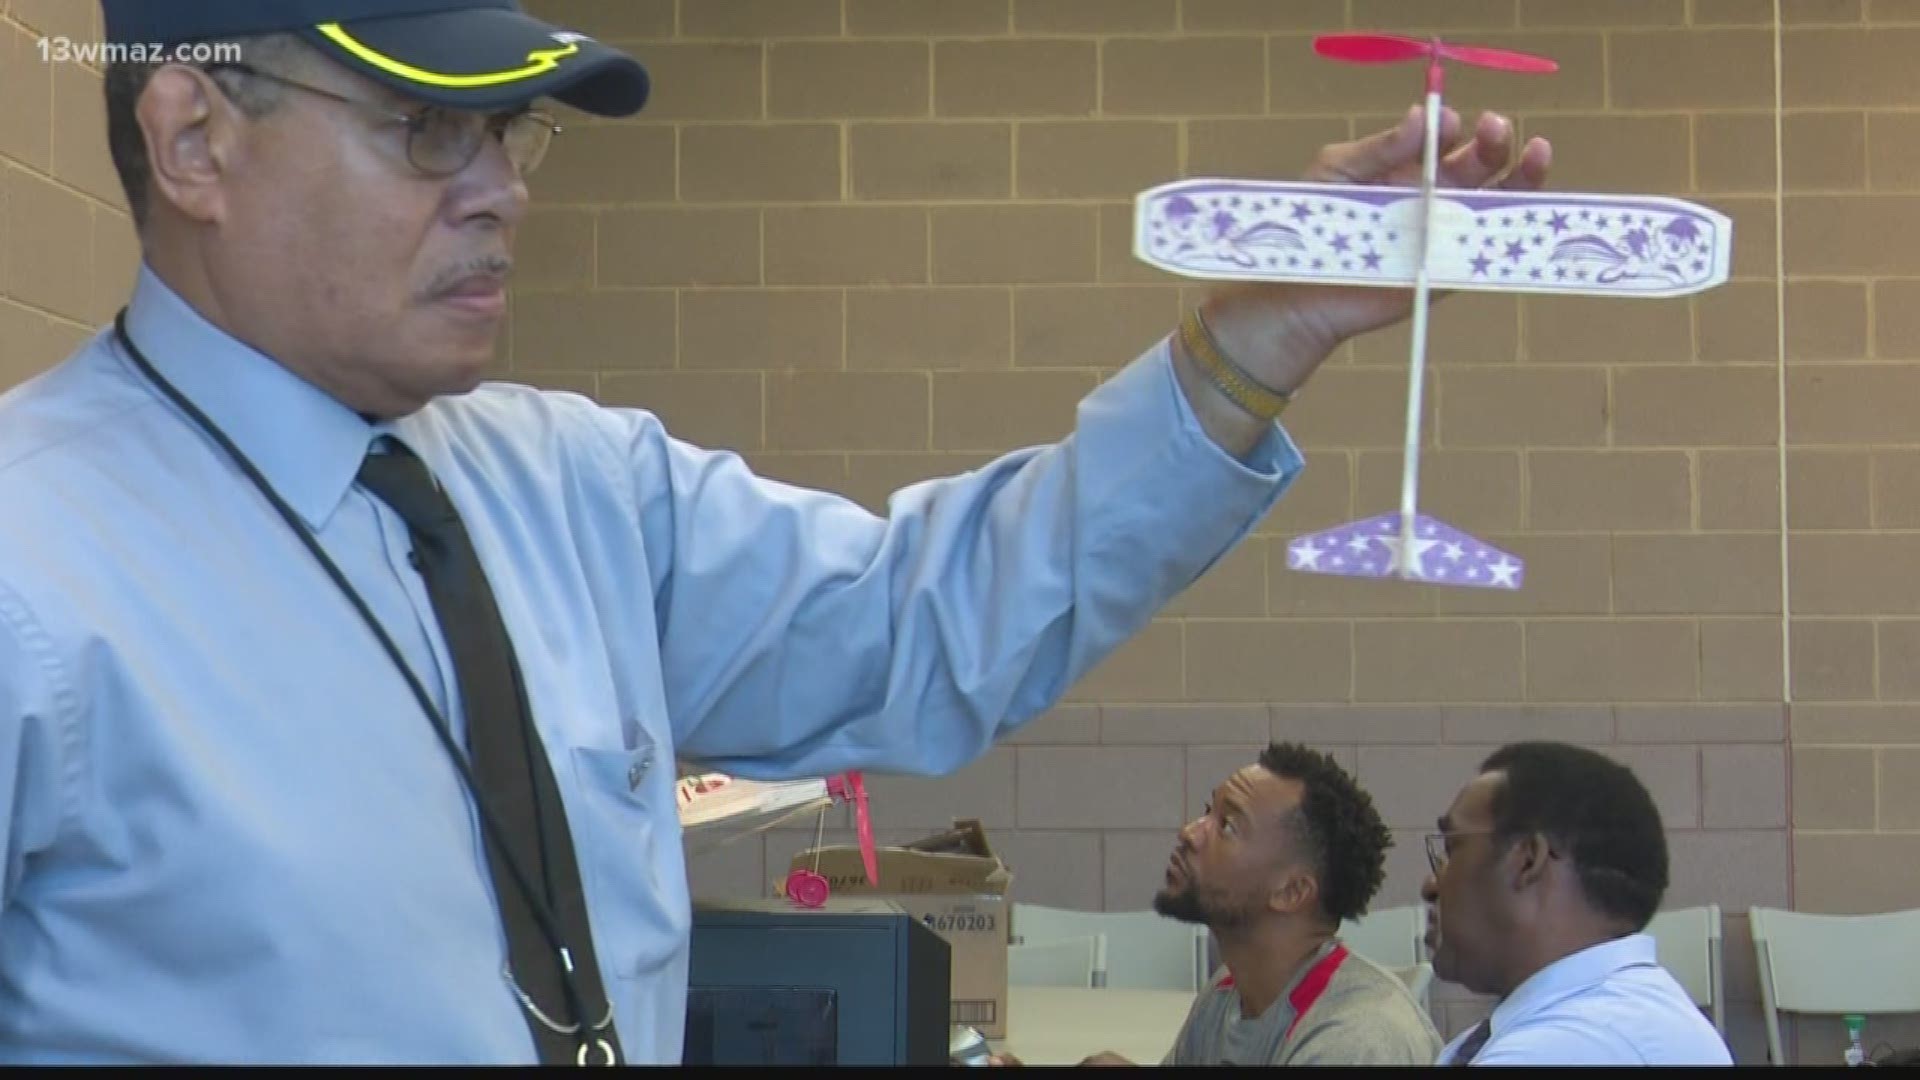 More than a dozen Central Georgia children spent Monday learning about aviation and engineering by building planes and rockets, and it was all thanks to the generosity of two Macon men.